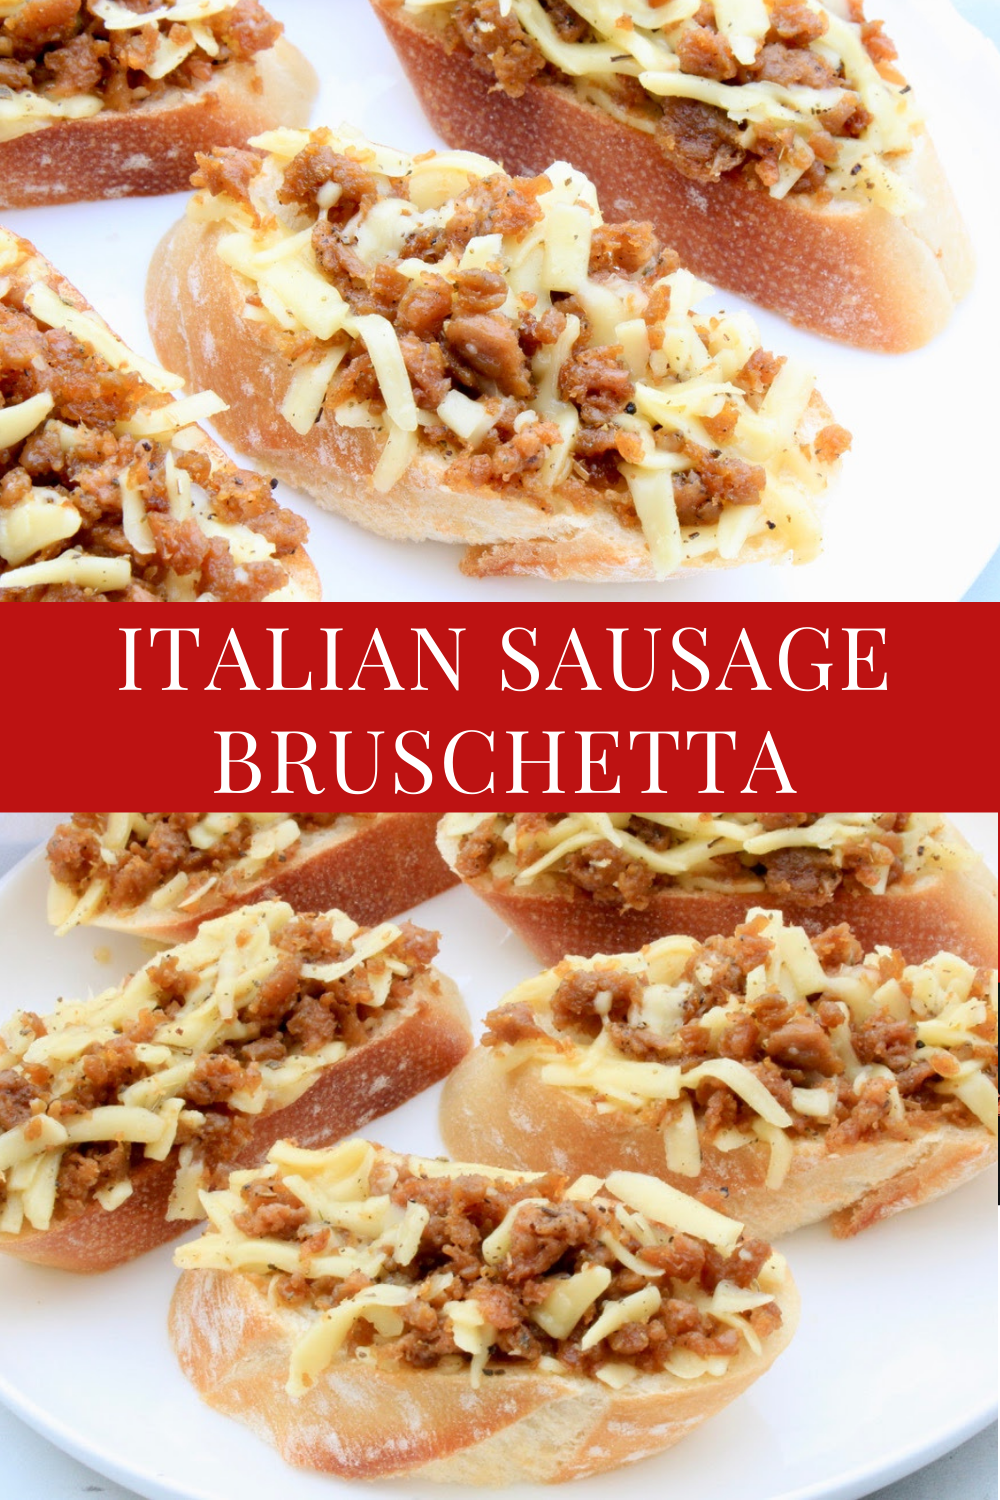 Italian Sausage Bruschetta ~ This savory appetizer delivers big flavors with simple ingredients! Great for holidays, parties, and game days! via @thiswifecooks